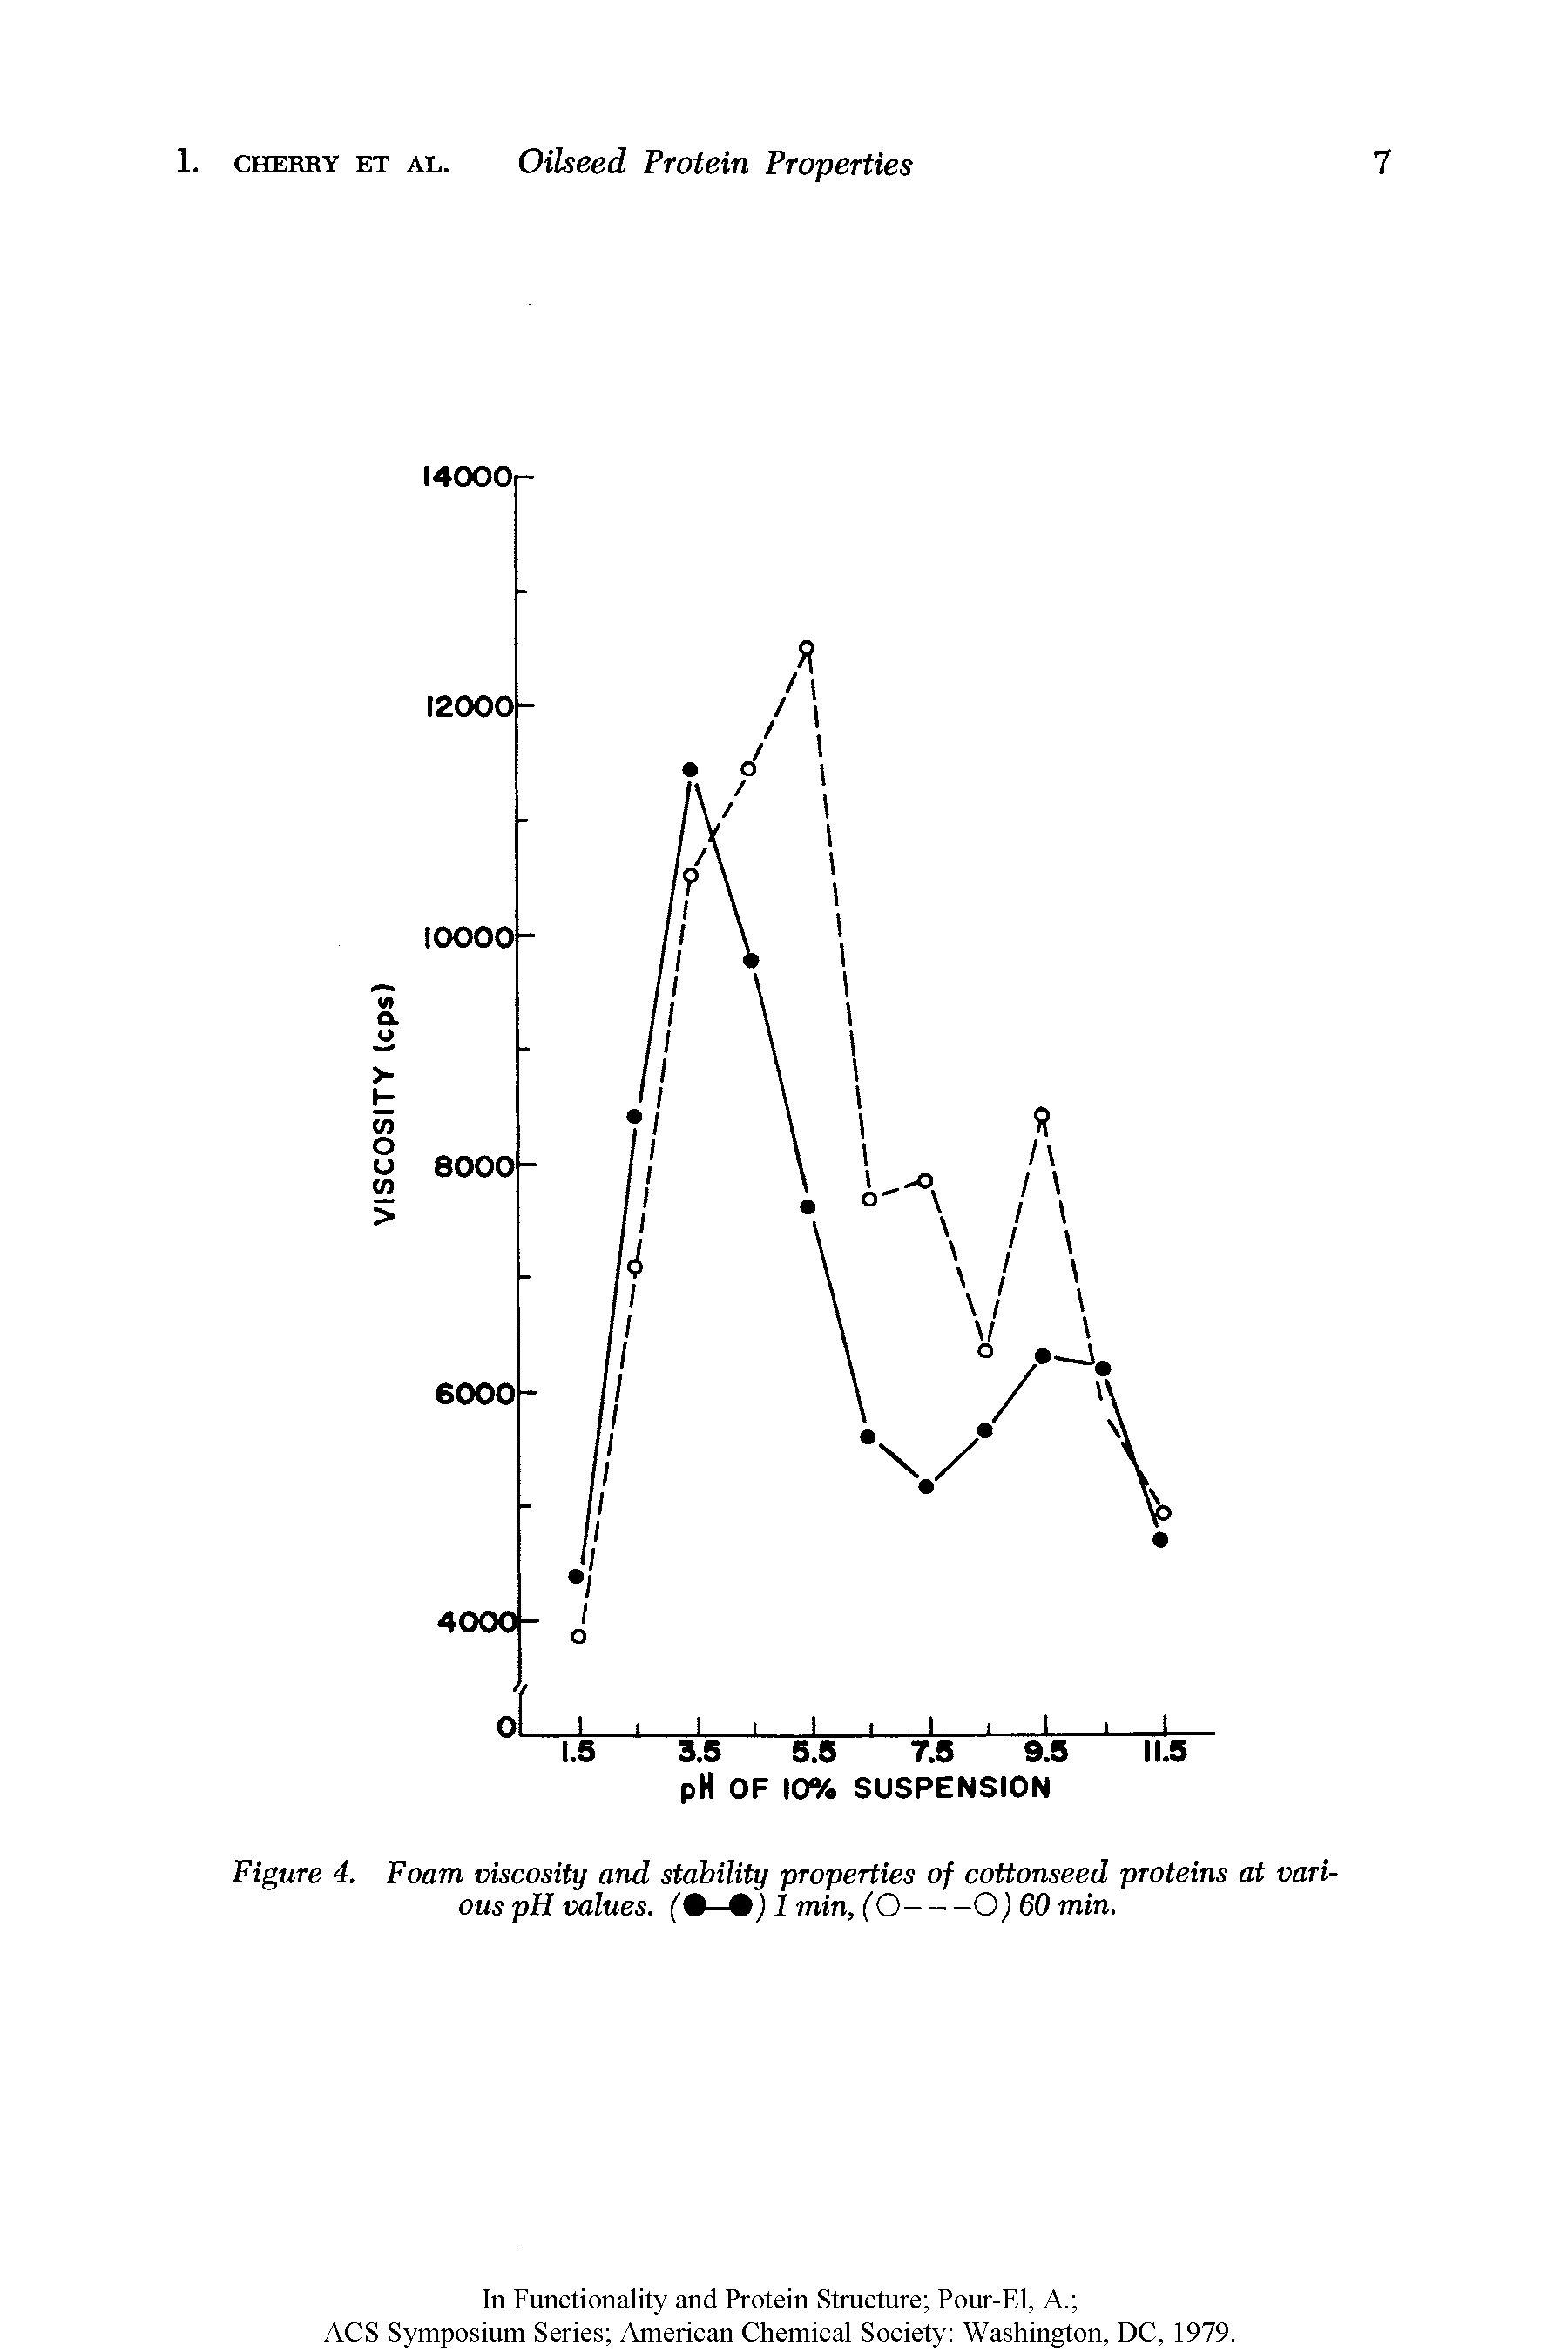 Figure 4. Foam viscosity and stability properties of cottonseed proteins at various pH values. ( —< ) 1 min, fO------------------------O) GO min.